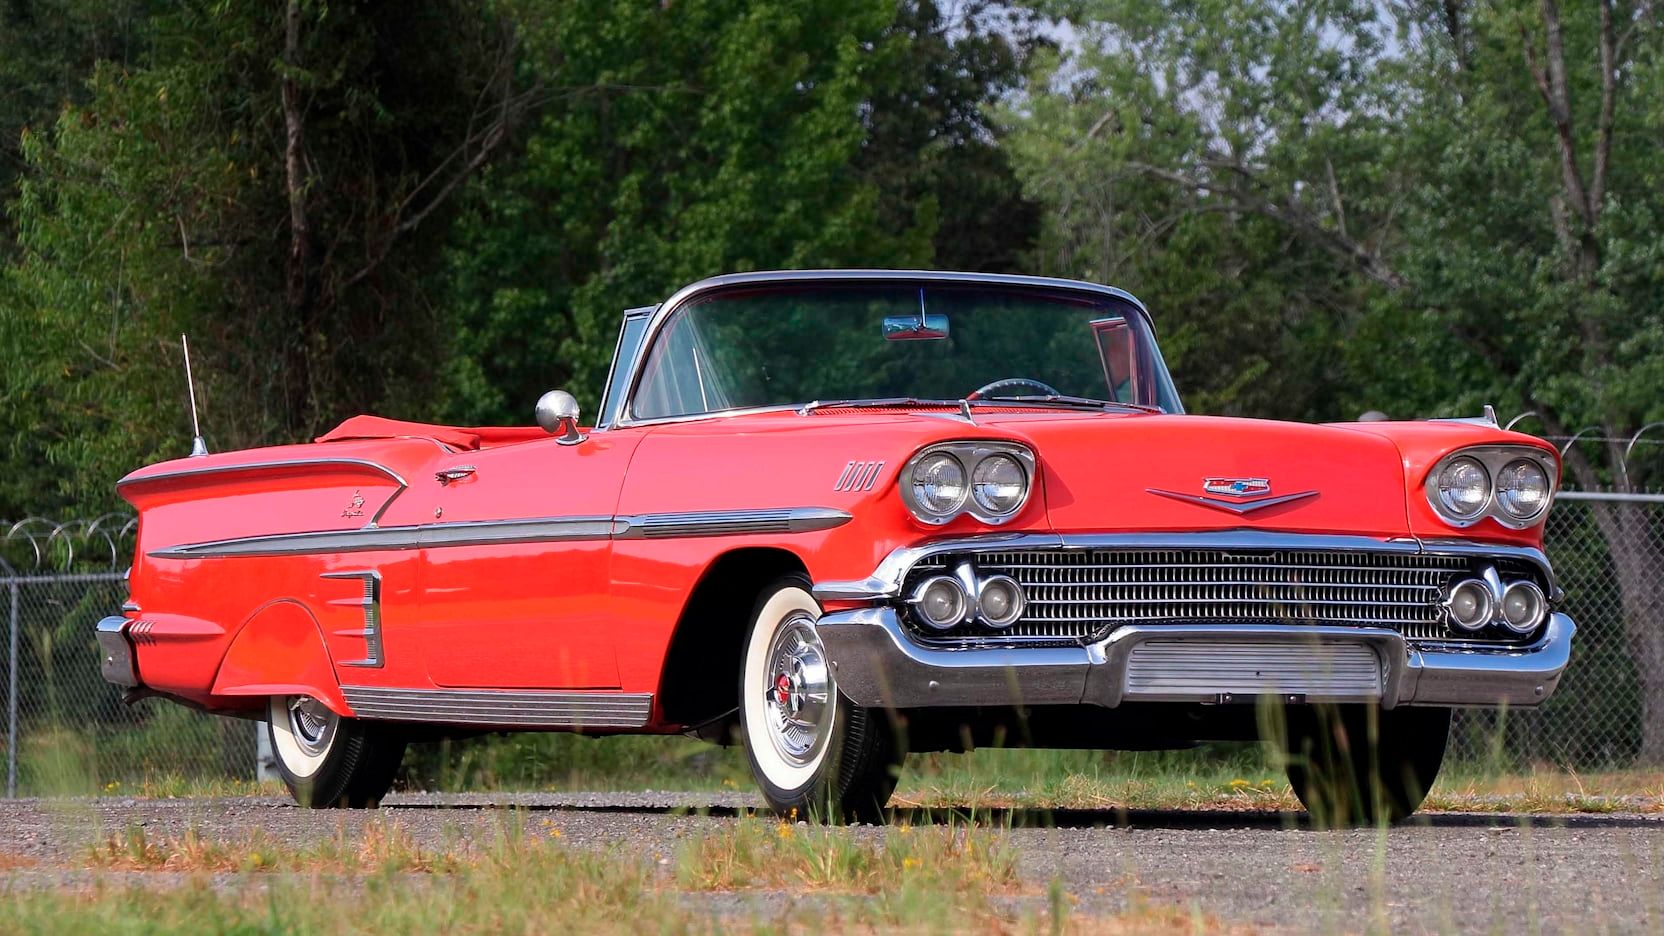 A parked 1958 Chevy Impala Convertible